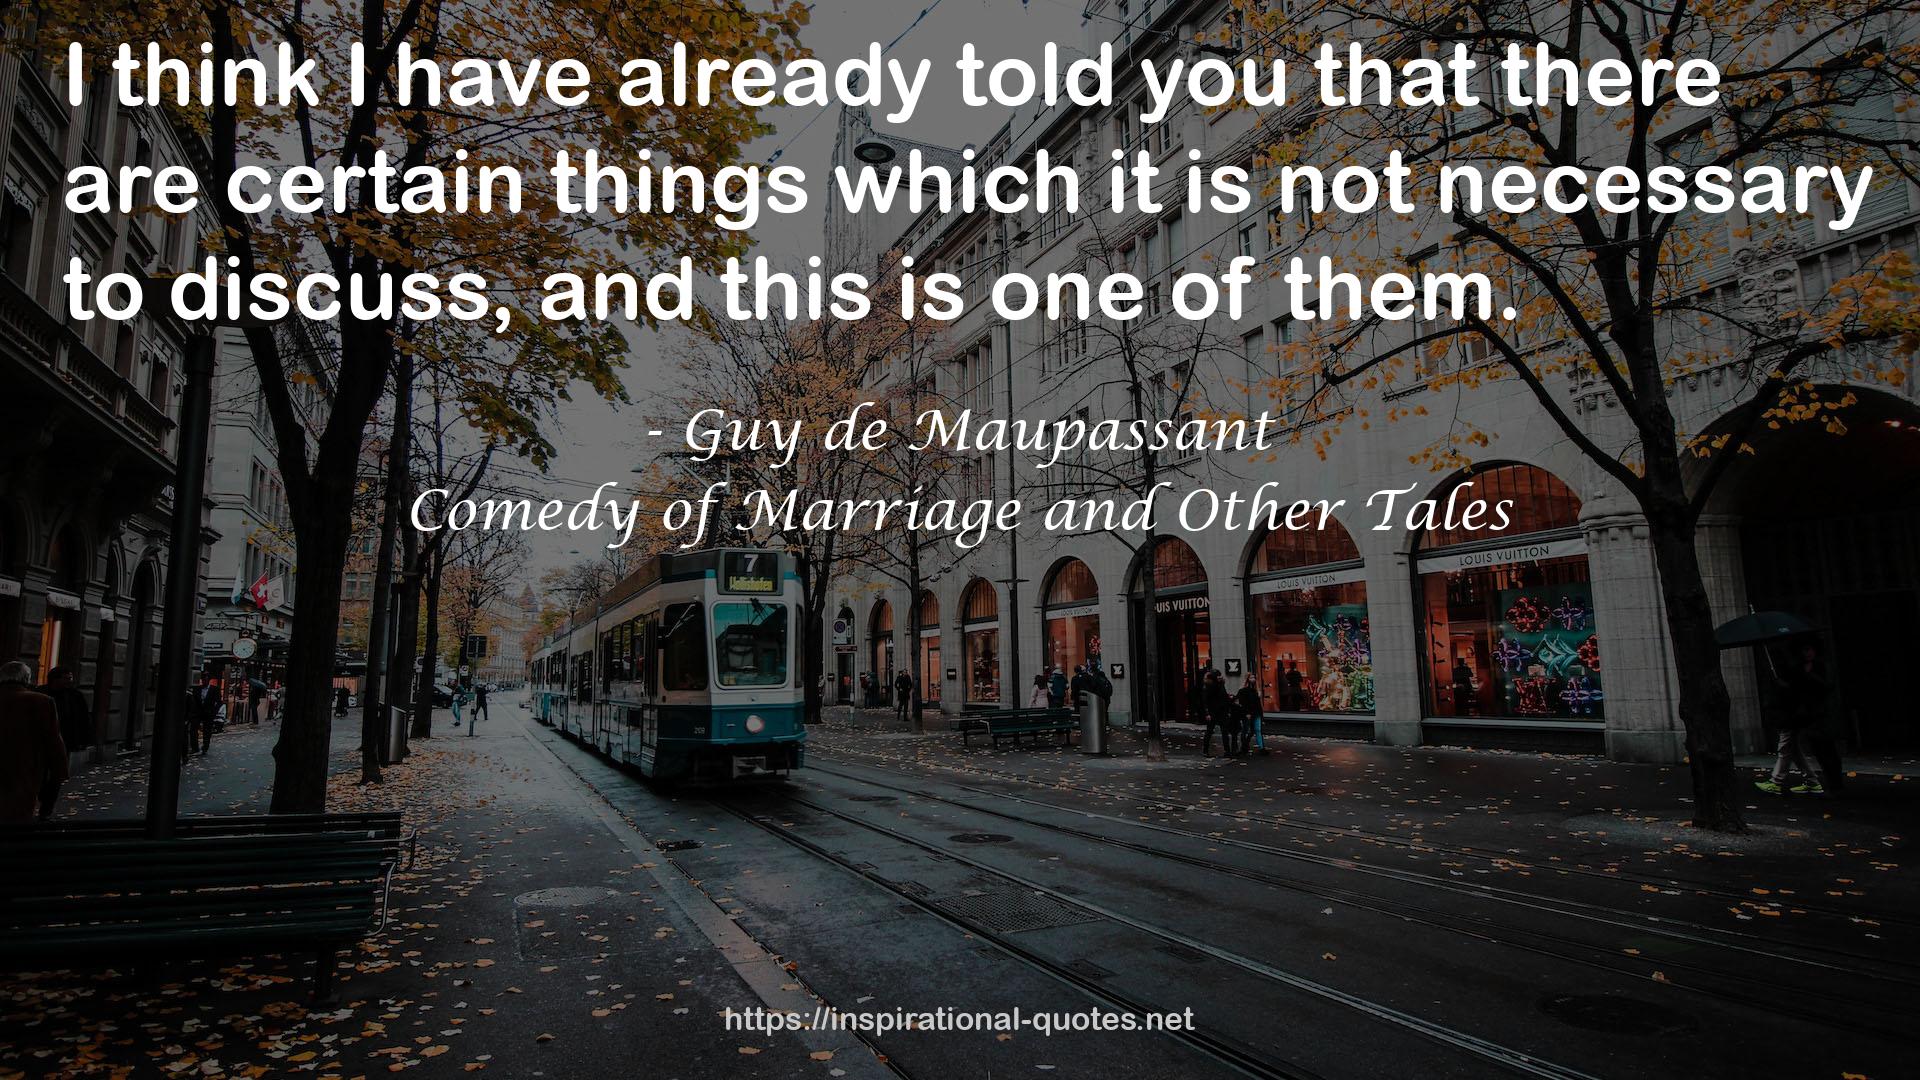 Comedy of Marriage and Other Tales QUOTES